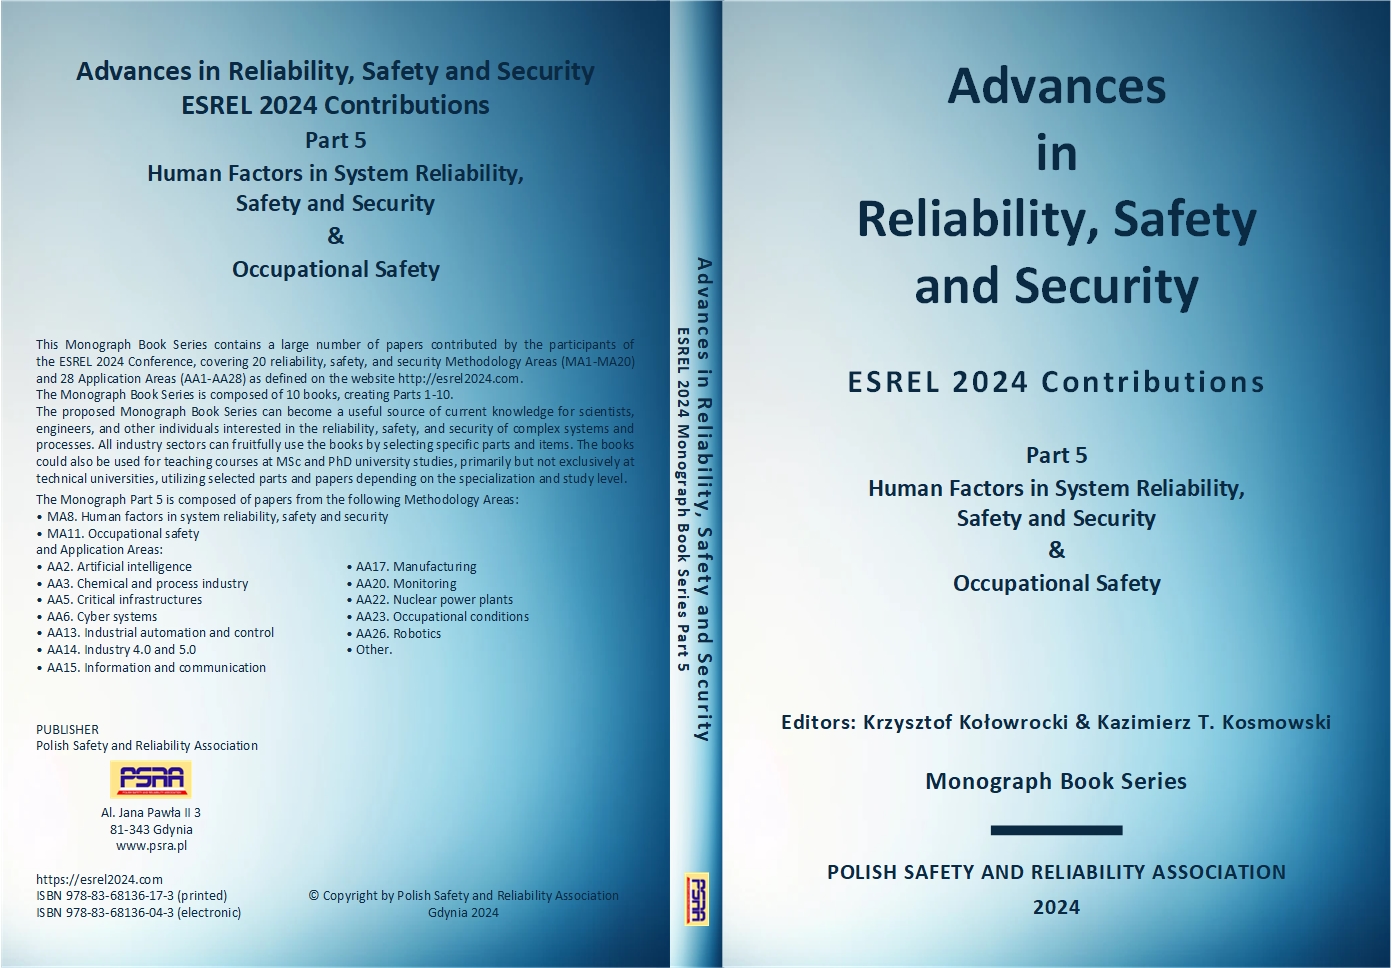 Part 5 Human Factors in System Reliability, Safety and Security & Occupational Safety